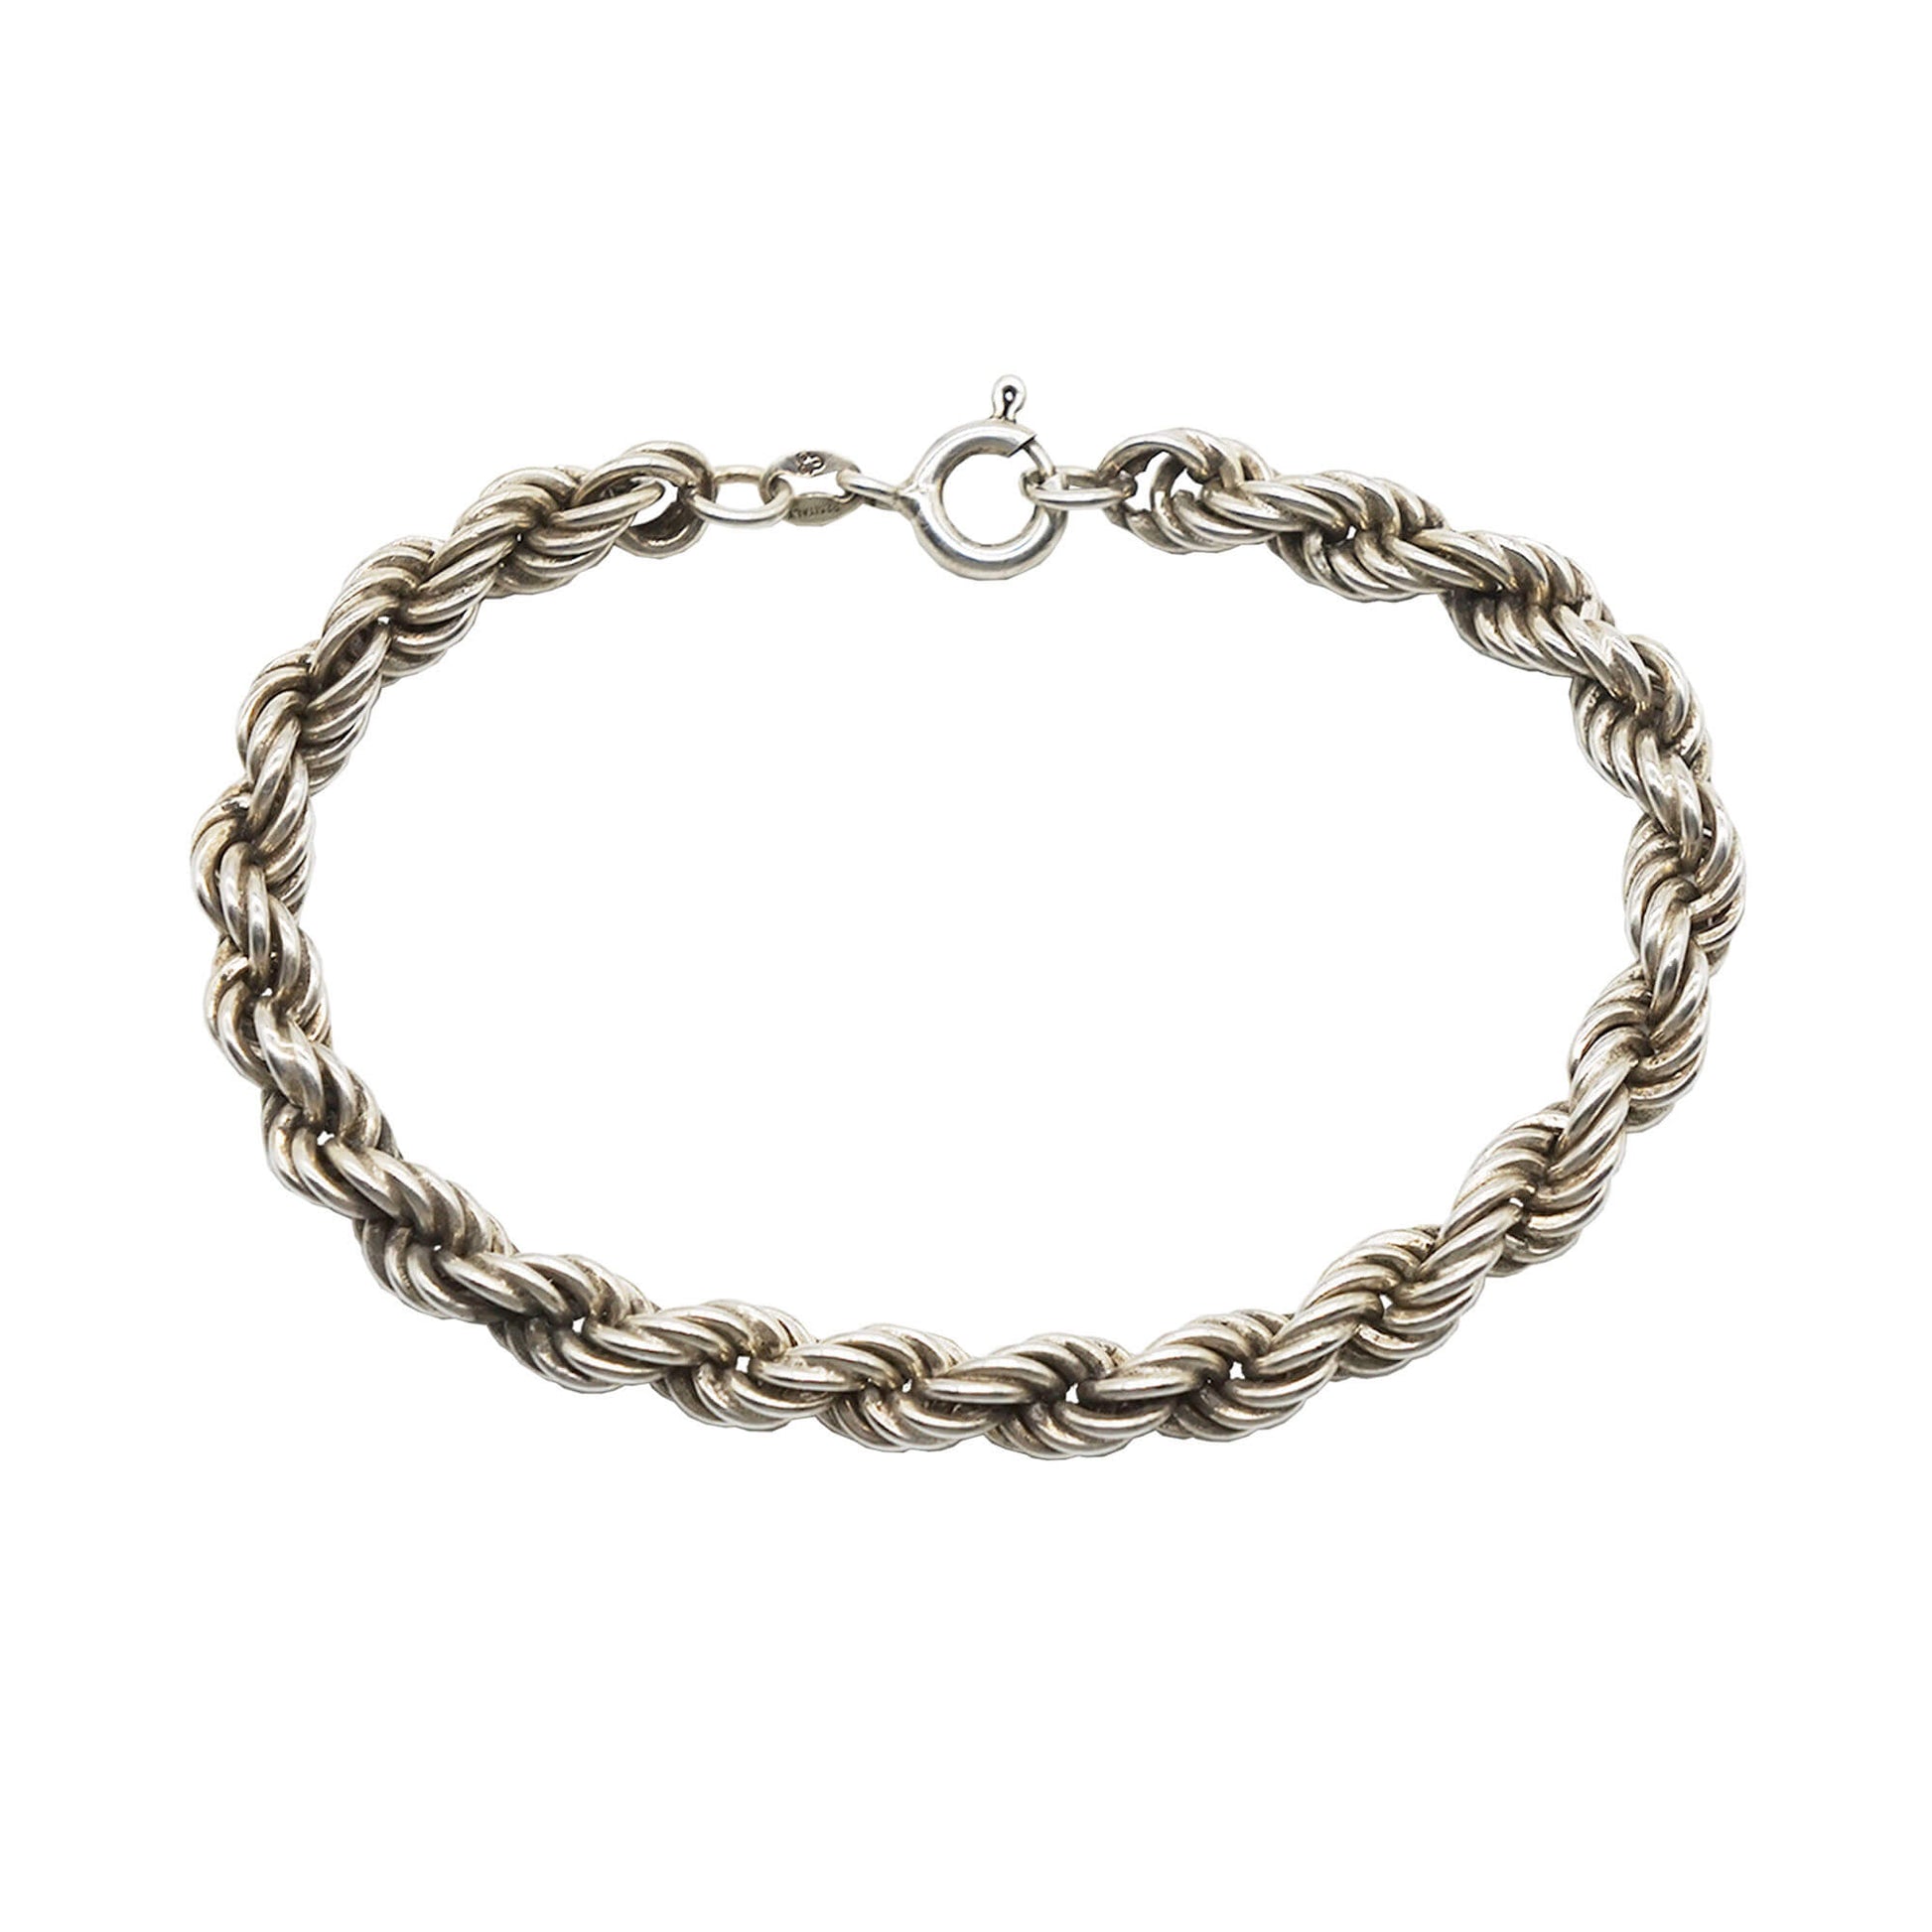 Chunky sterling silver rope chain bracelet with round clasp.